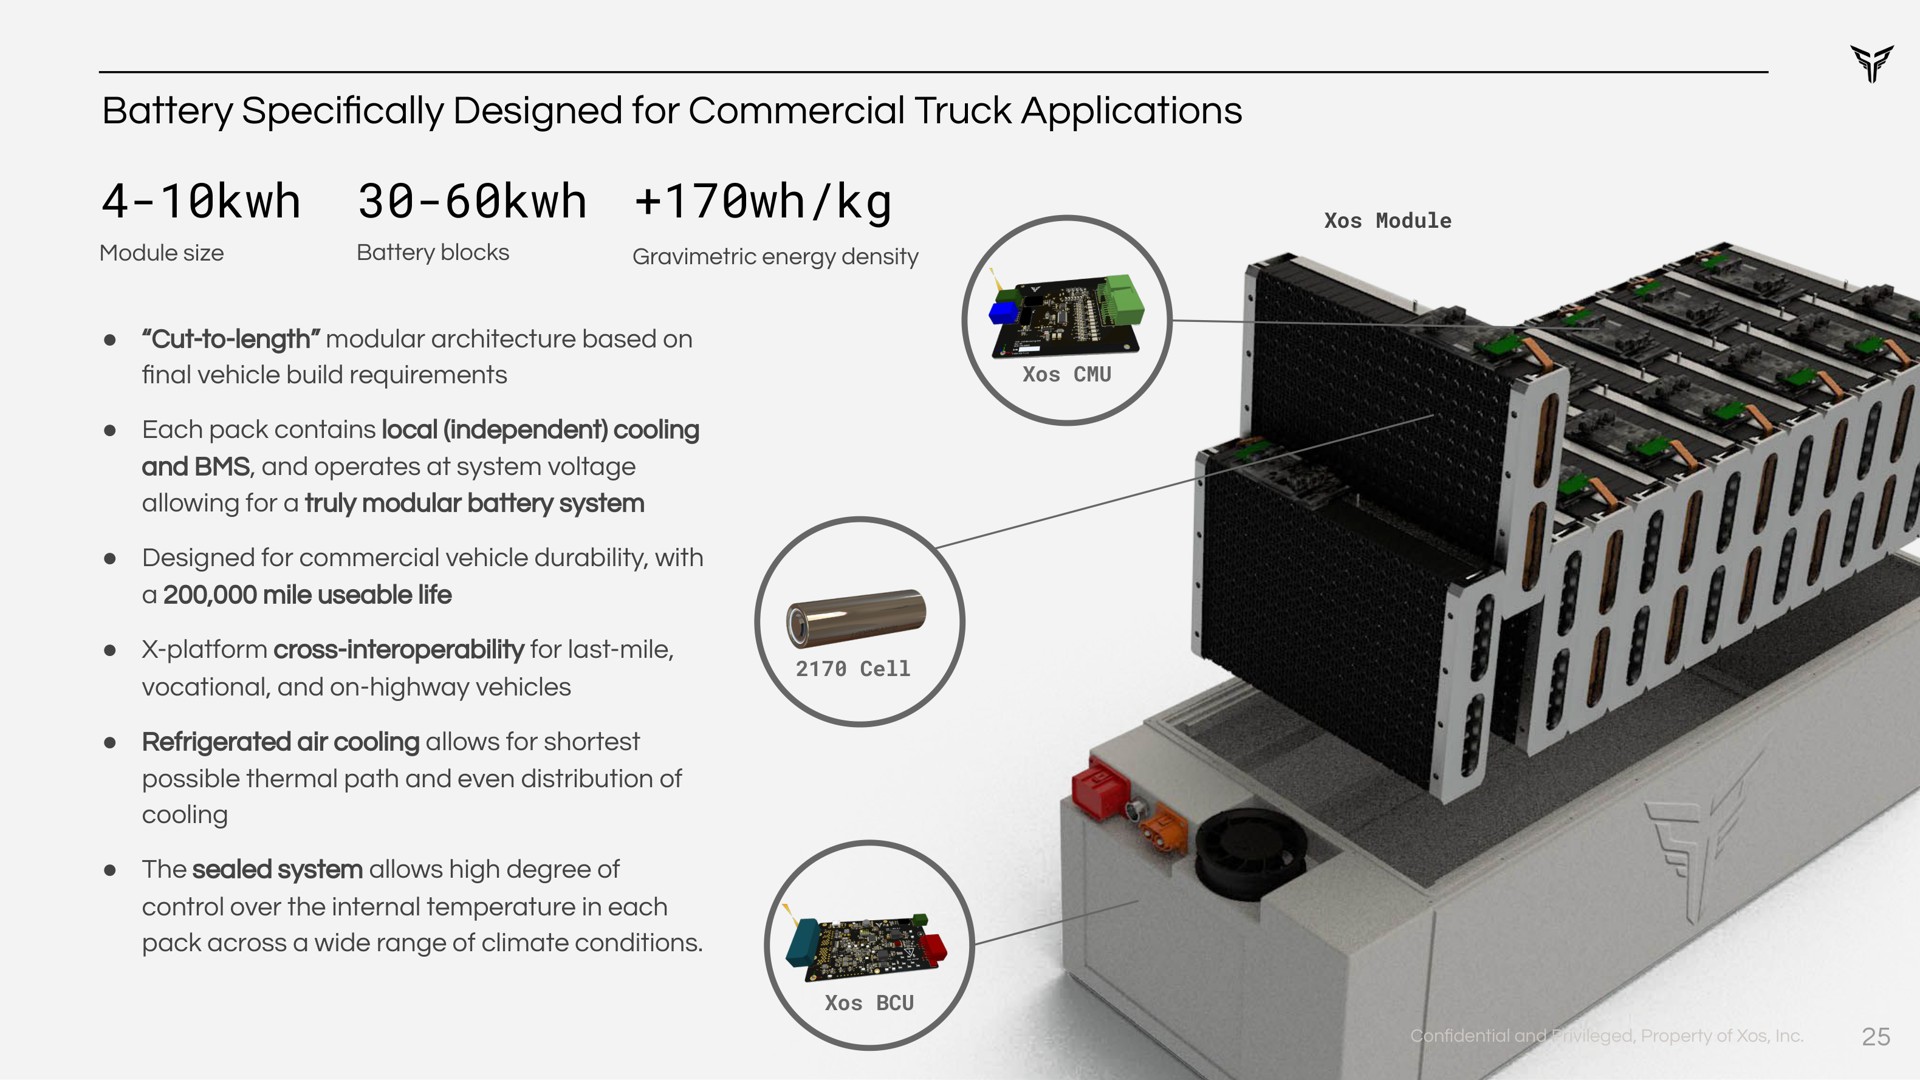 battery designed for commercial truck applications specifically | Xos